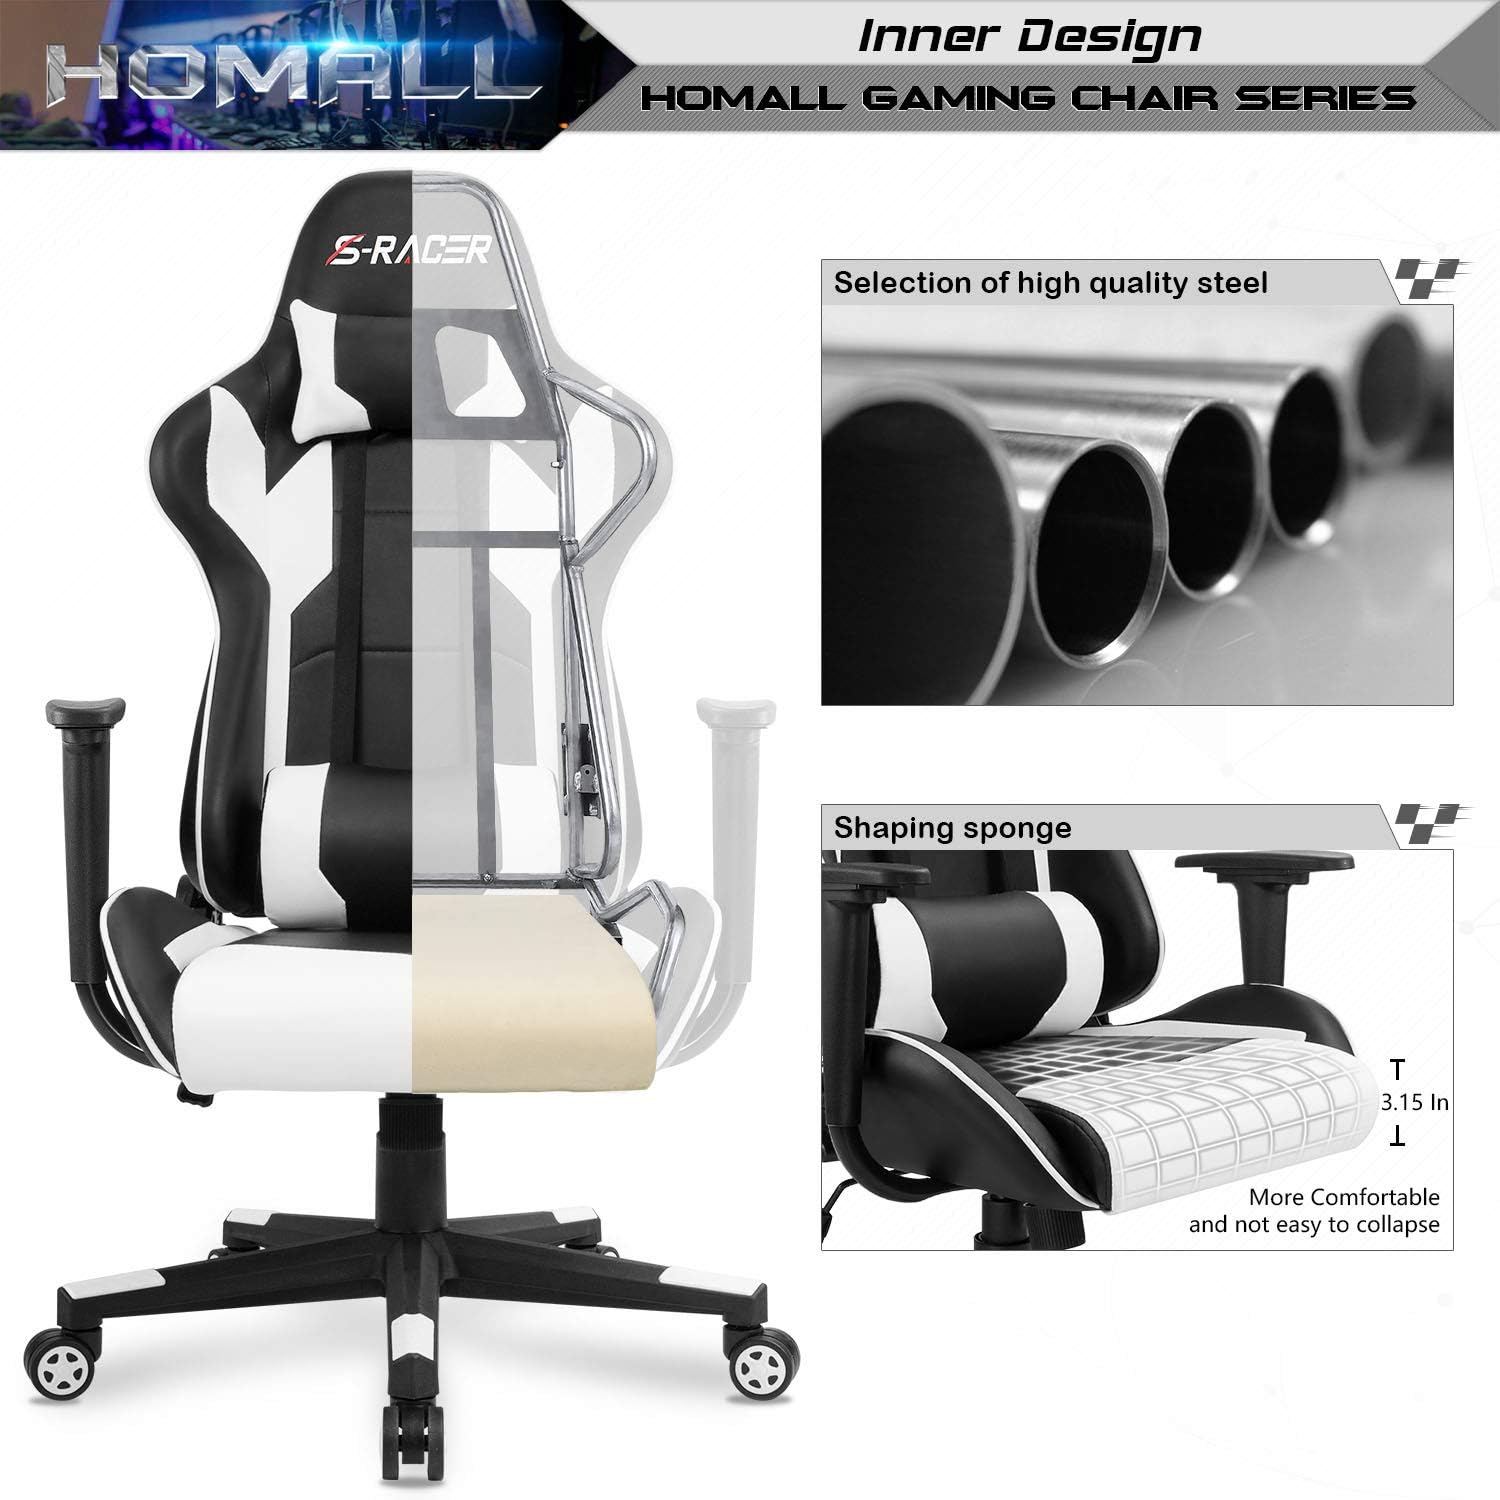 Popular 1 Homall Gaming Chair Review - The Gaming Mecca